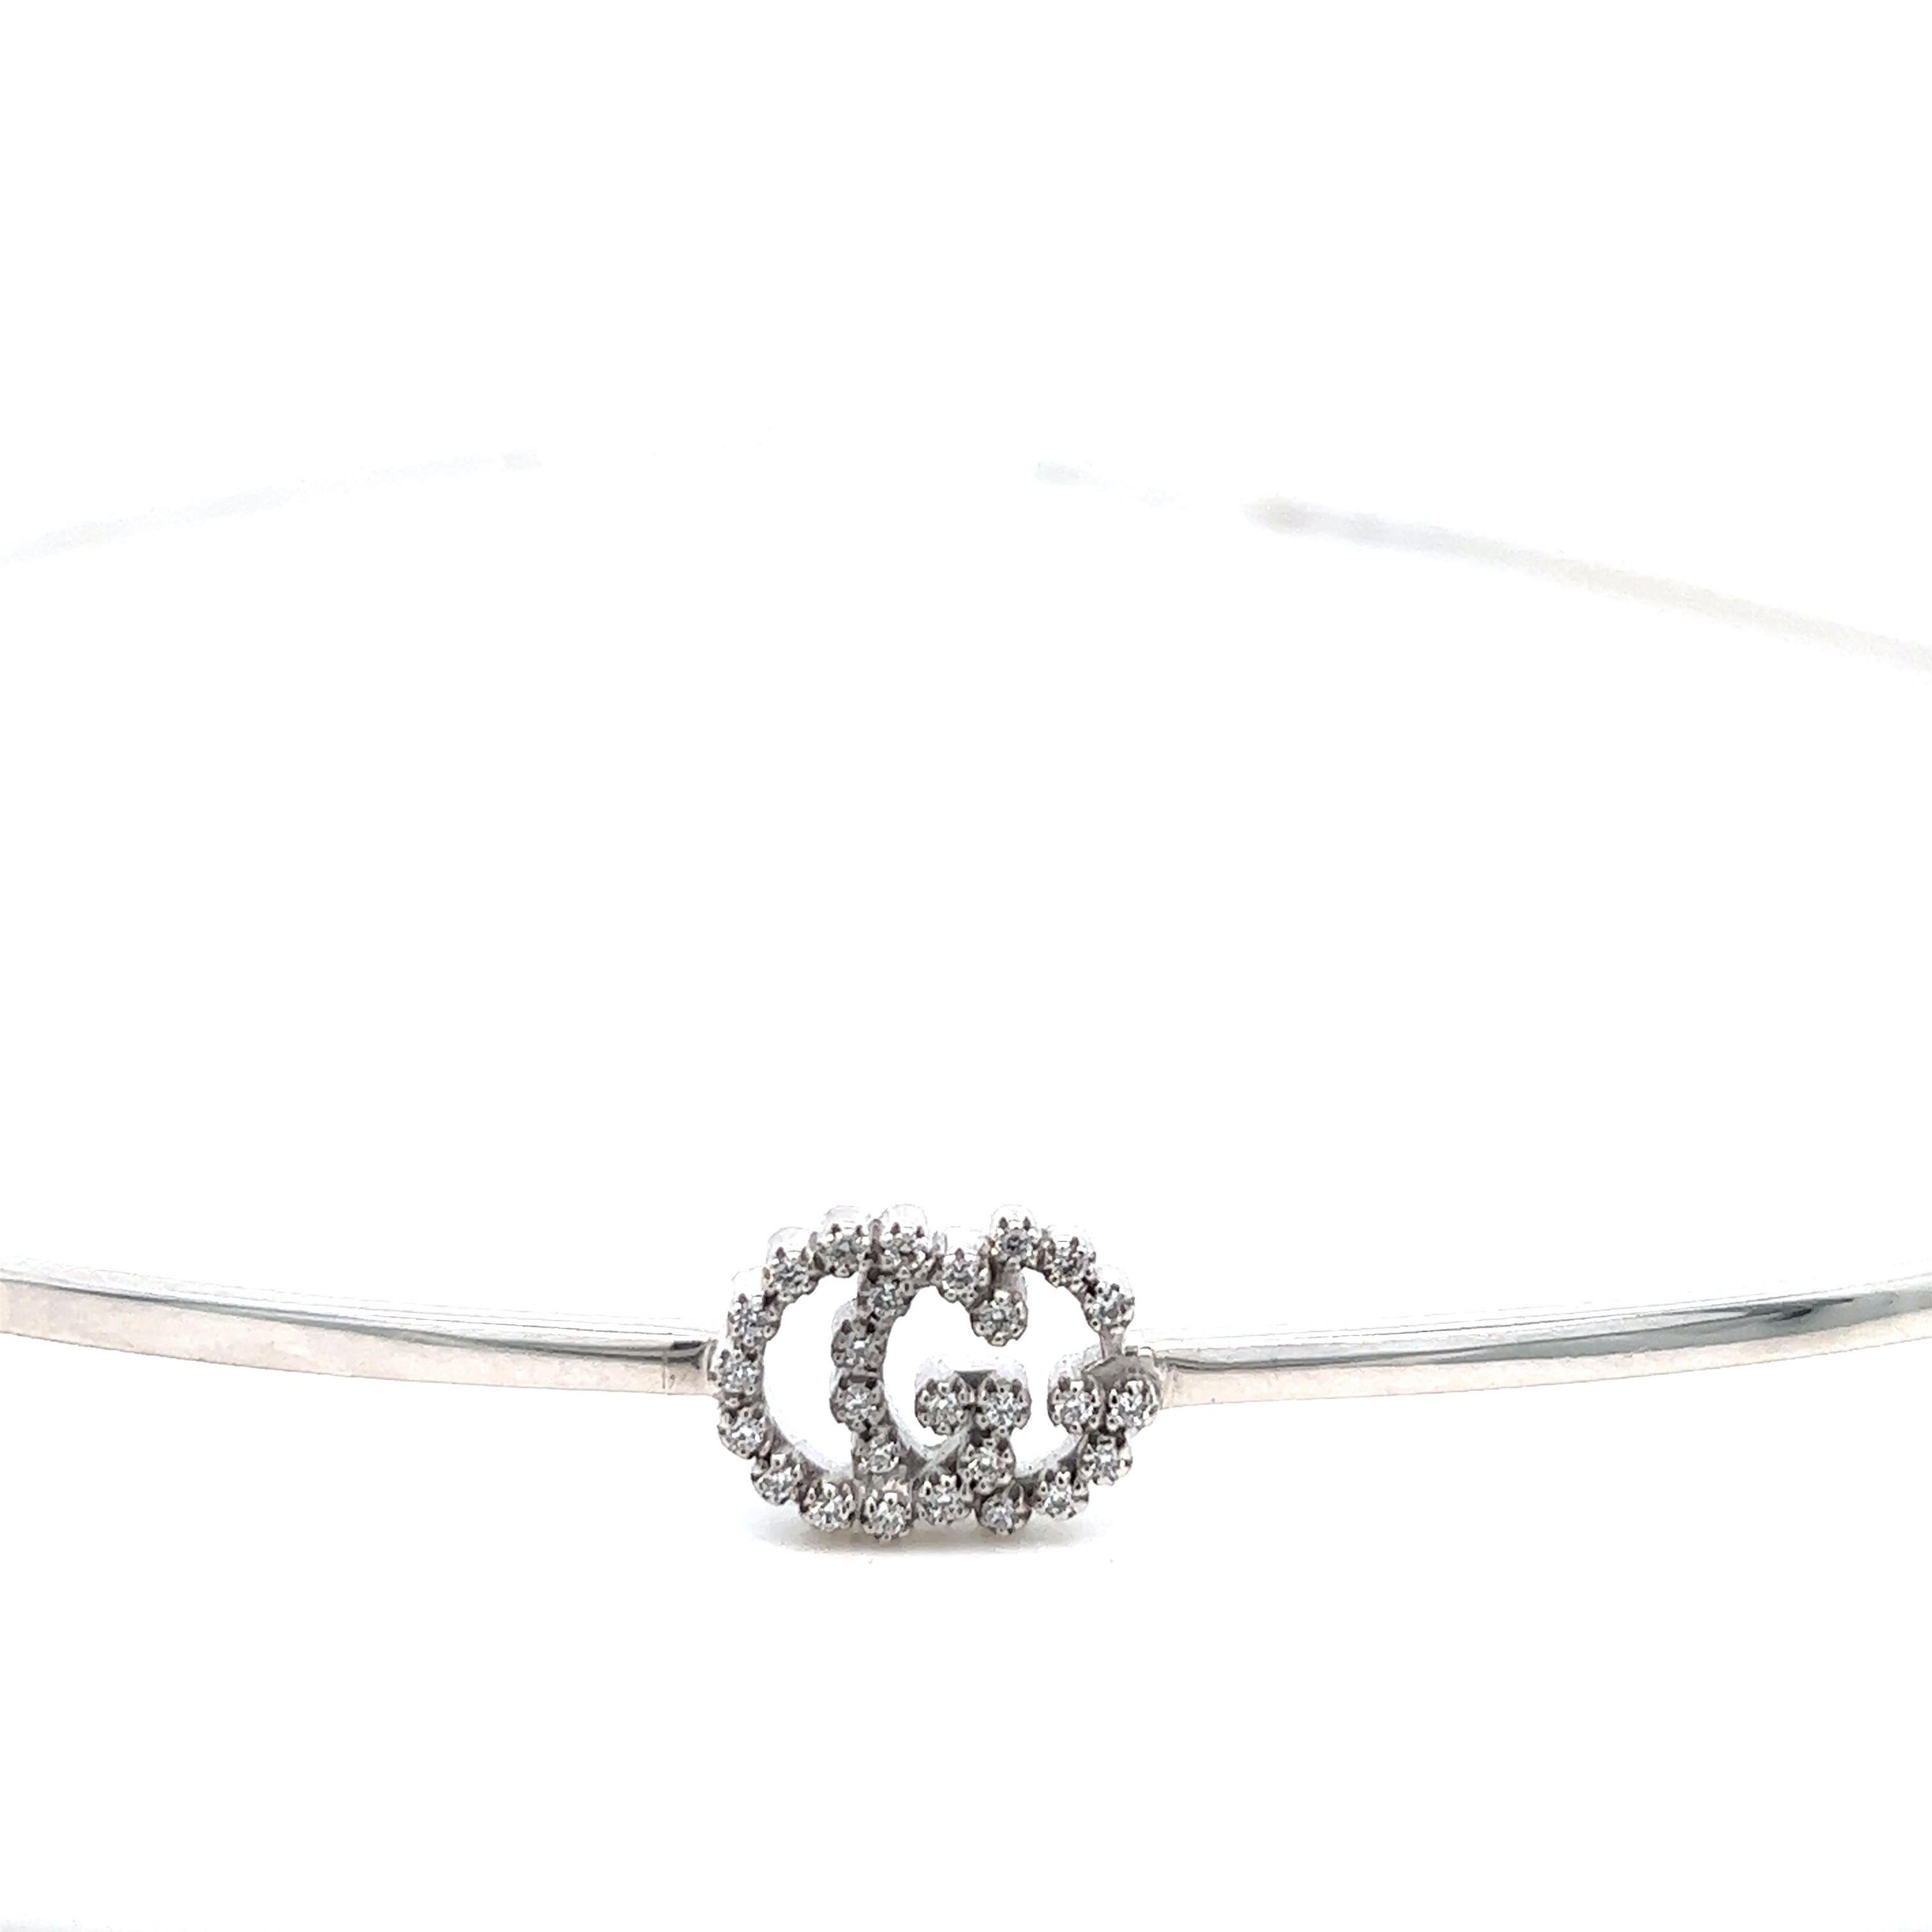 Gucci choker necklace; marked Gucci, made in Italy, M, Au750, 1231 VI

18 karat white gold, small round-cut diamonds of approximately 0.20 carat

Size: width 4.38 inches, length 4.25 inches
Total weight: 8.9 grams